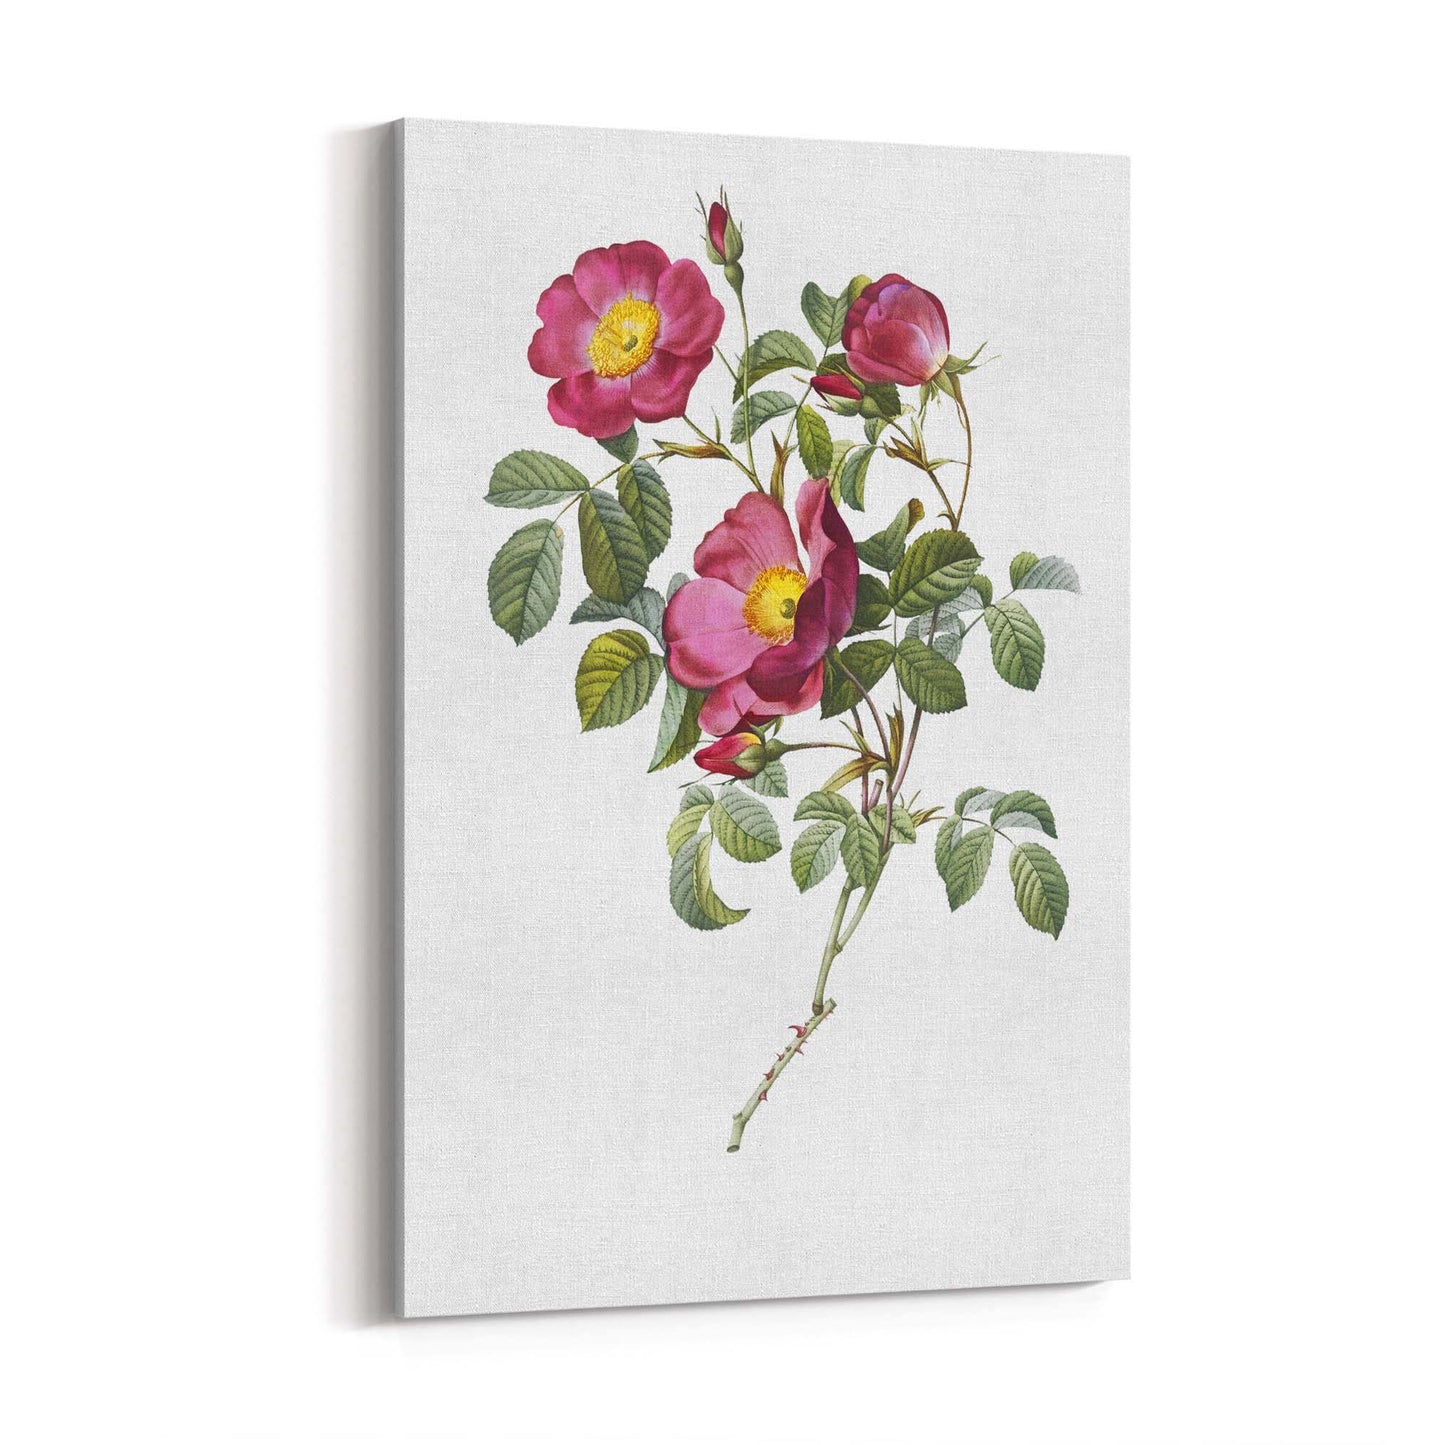 Flower Botanical Painting Kitchen Hallway Wall Art #41 - The Affordable Art Company